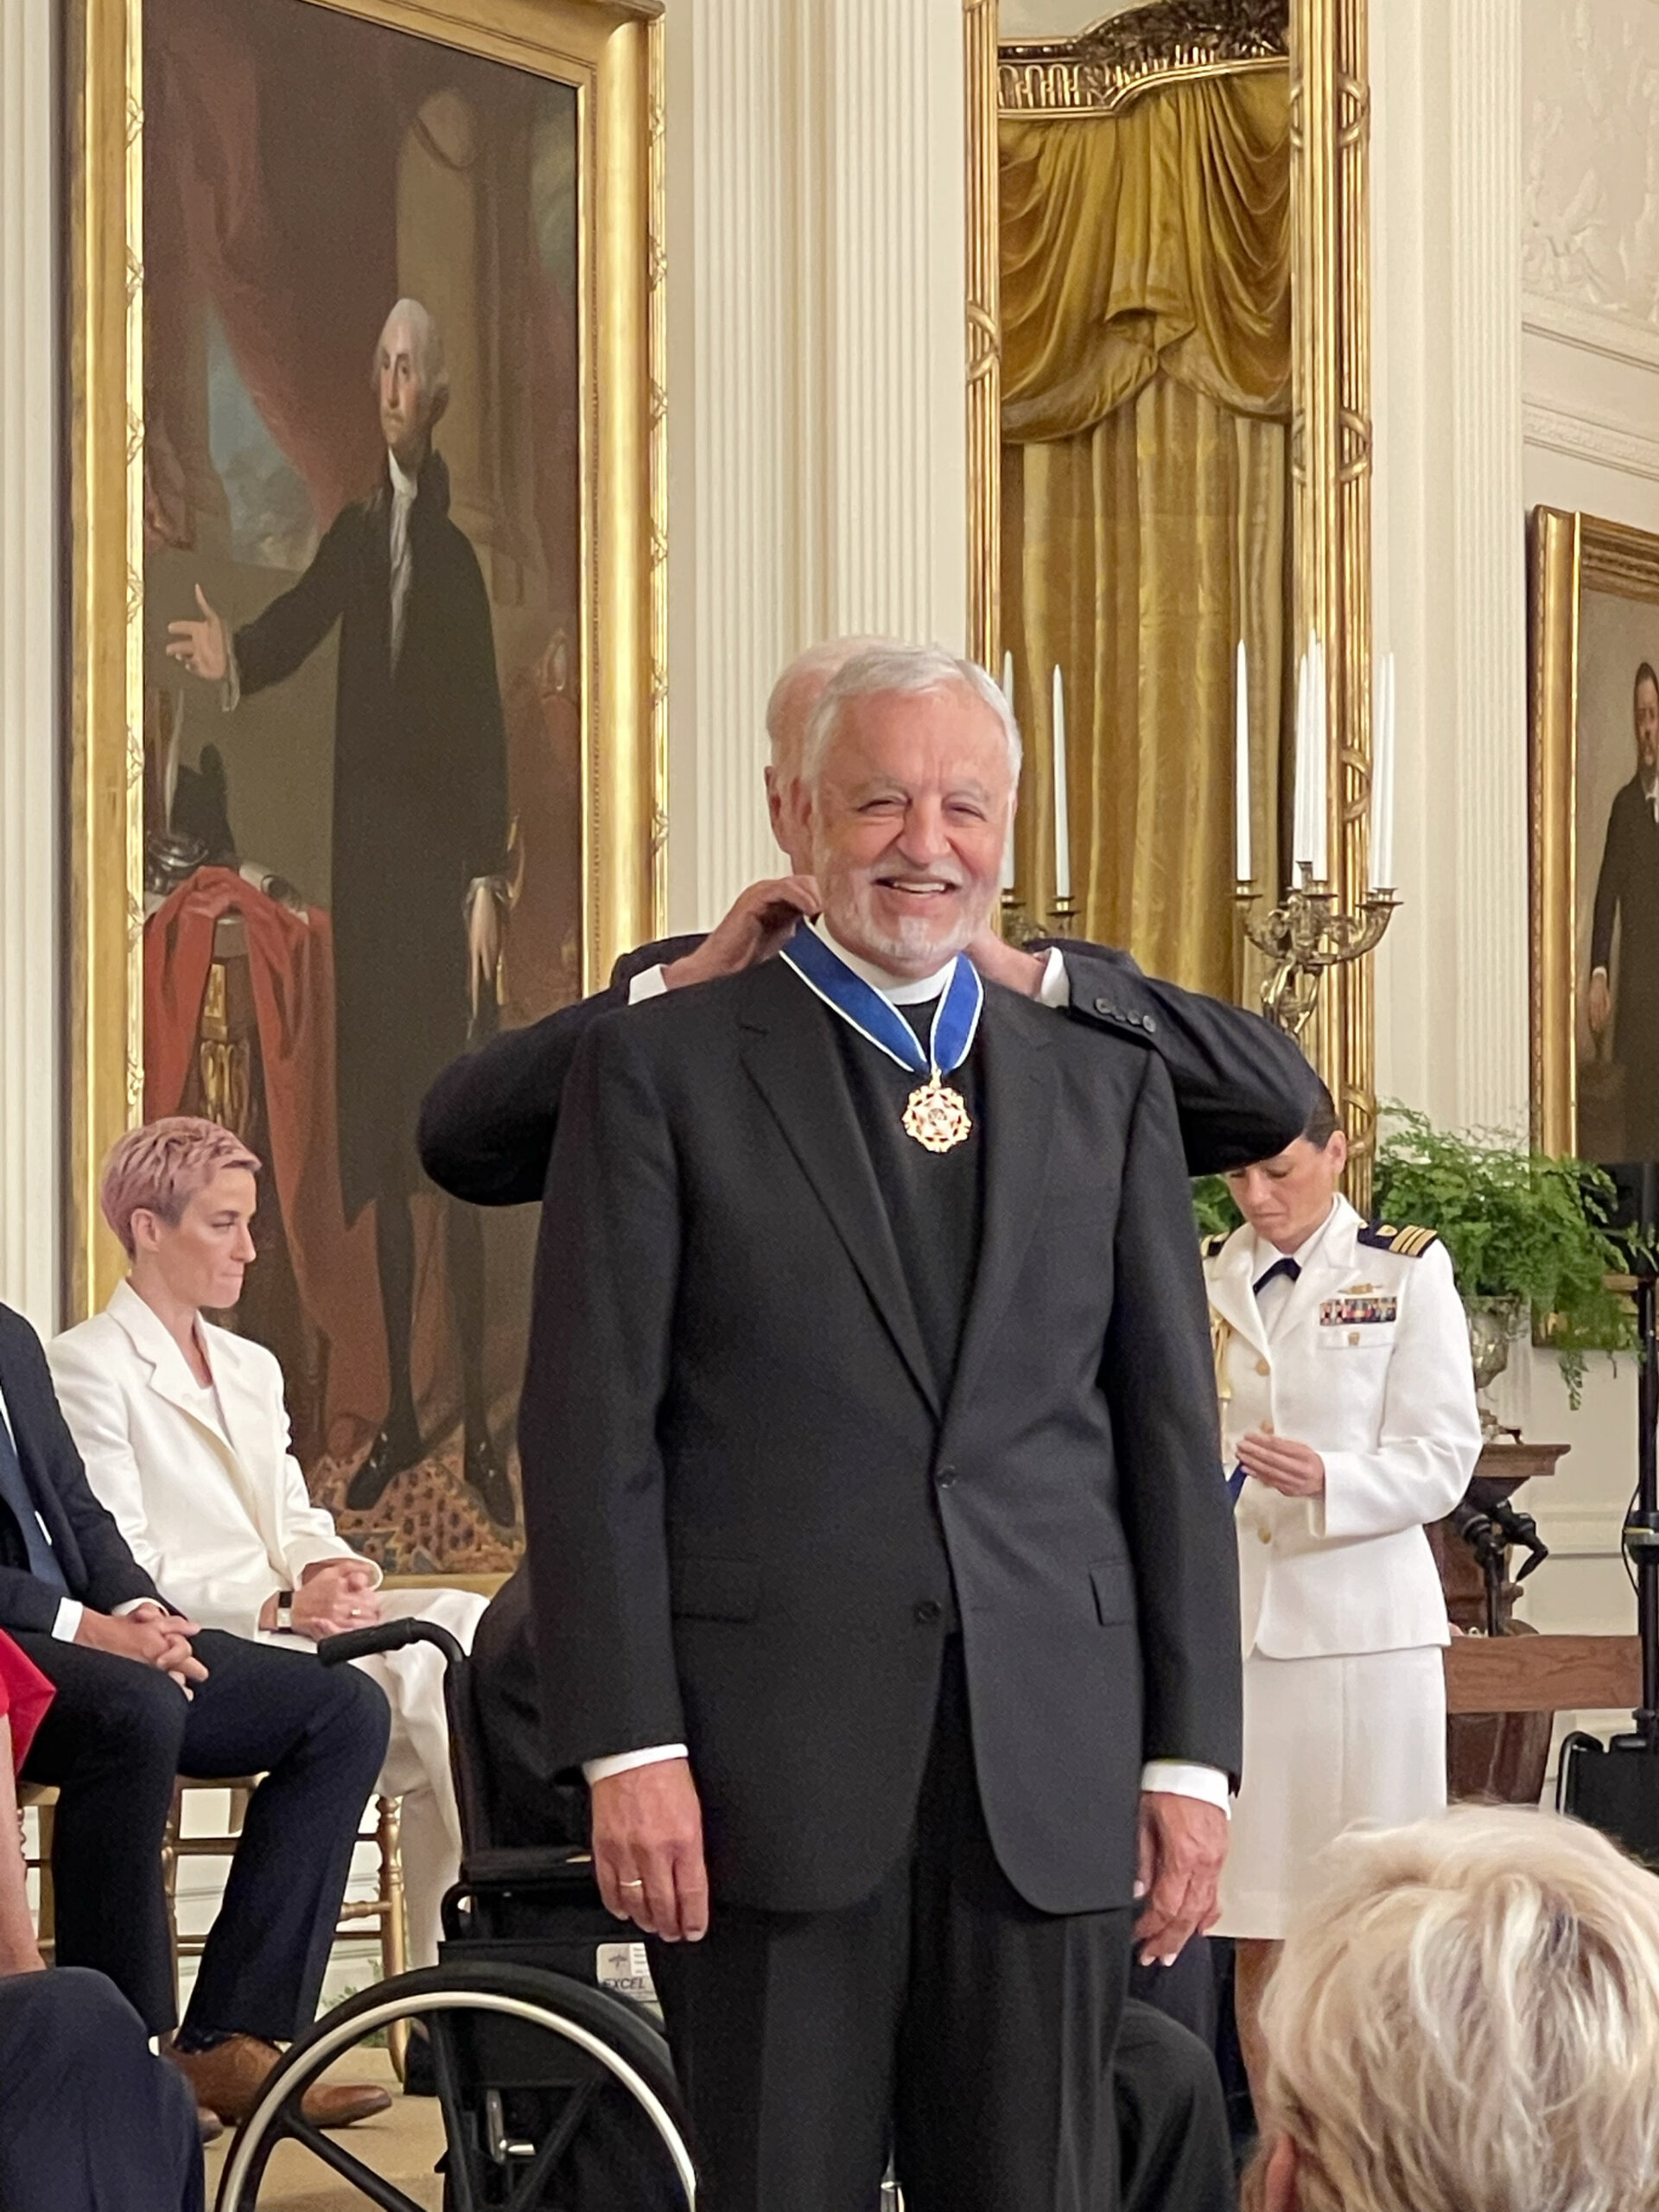 On July 7, 2022, Father Alex Karloutsos, Archon Spiritual Advisor received the Presidential Medal of Freedom from President Joe Biden at The White House.